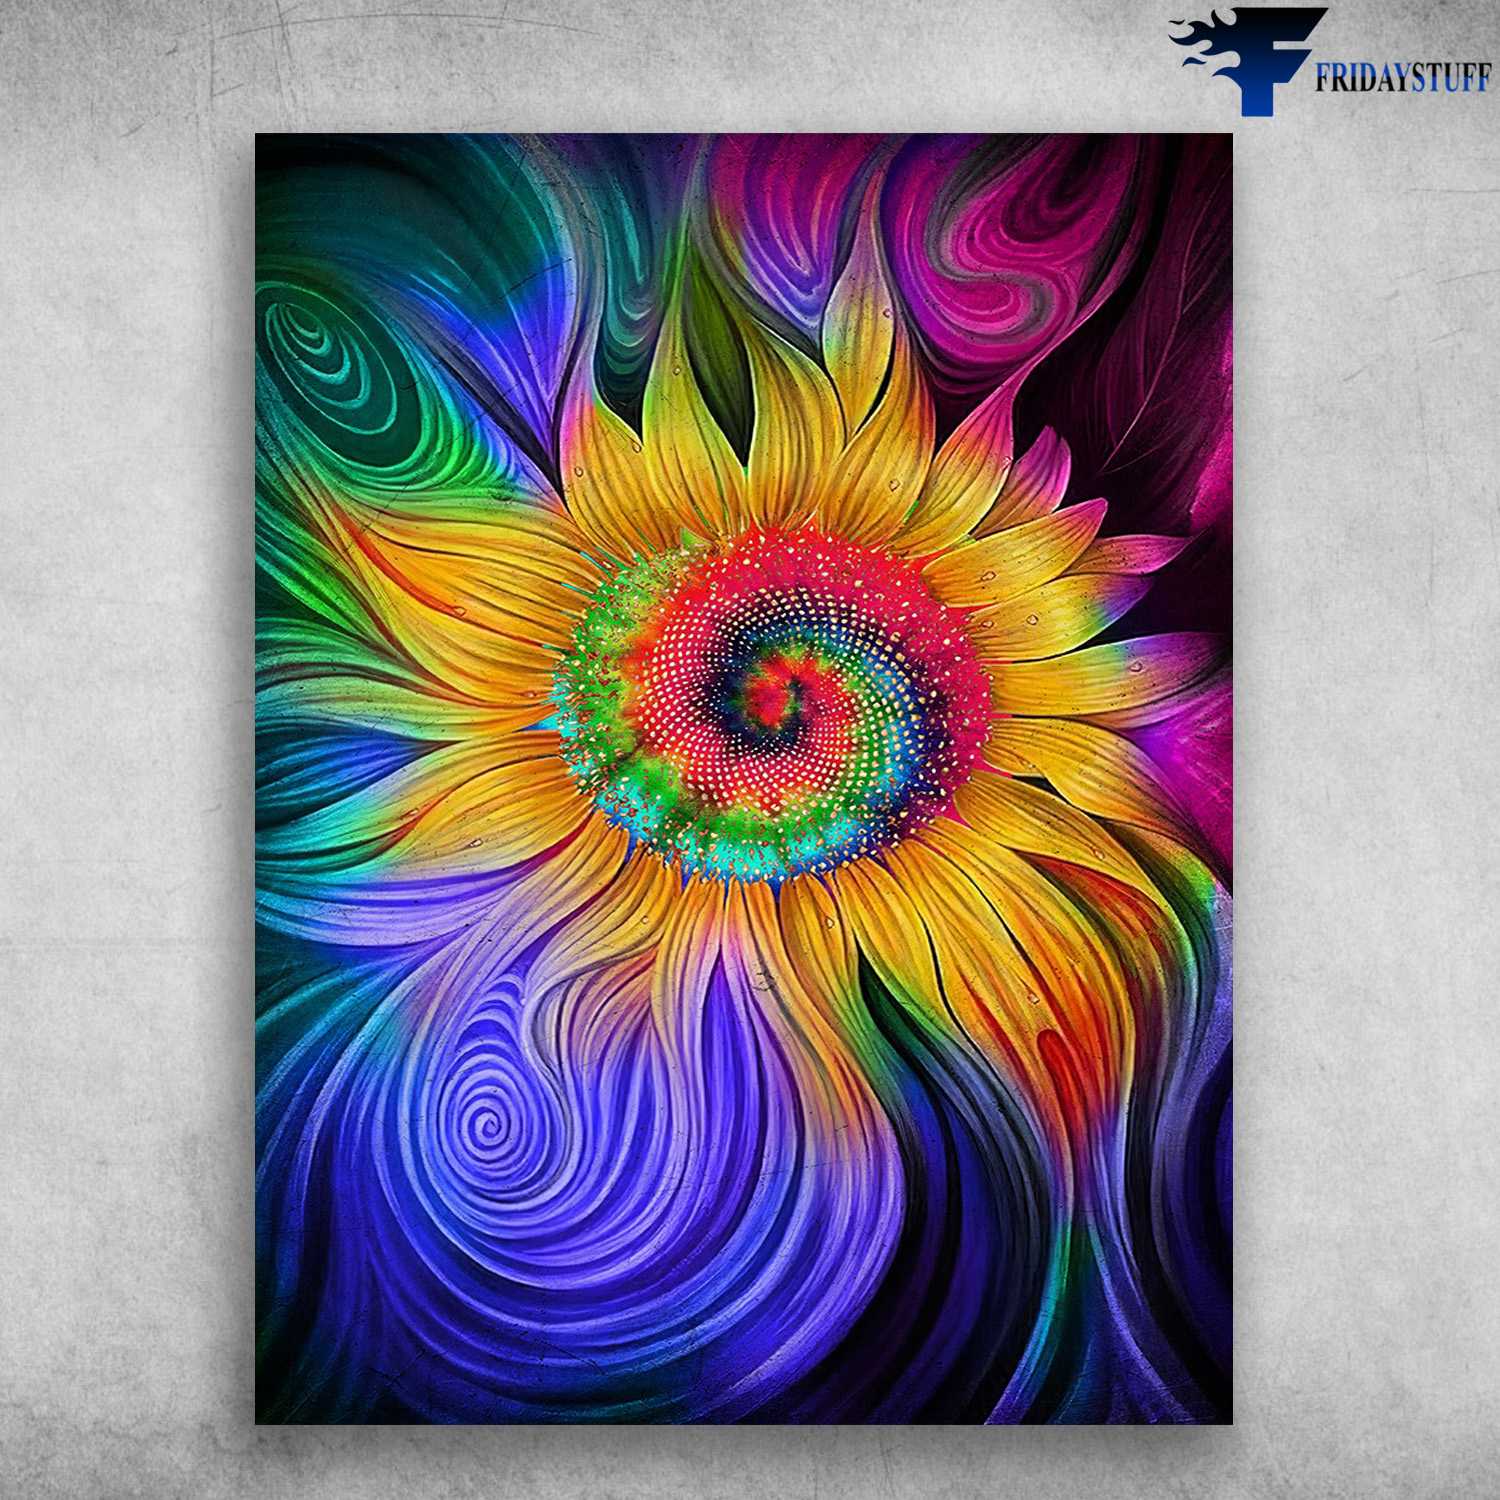 Colorful Flower, Sunflower Poster, Colorful Art